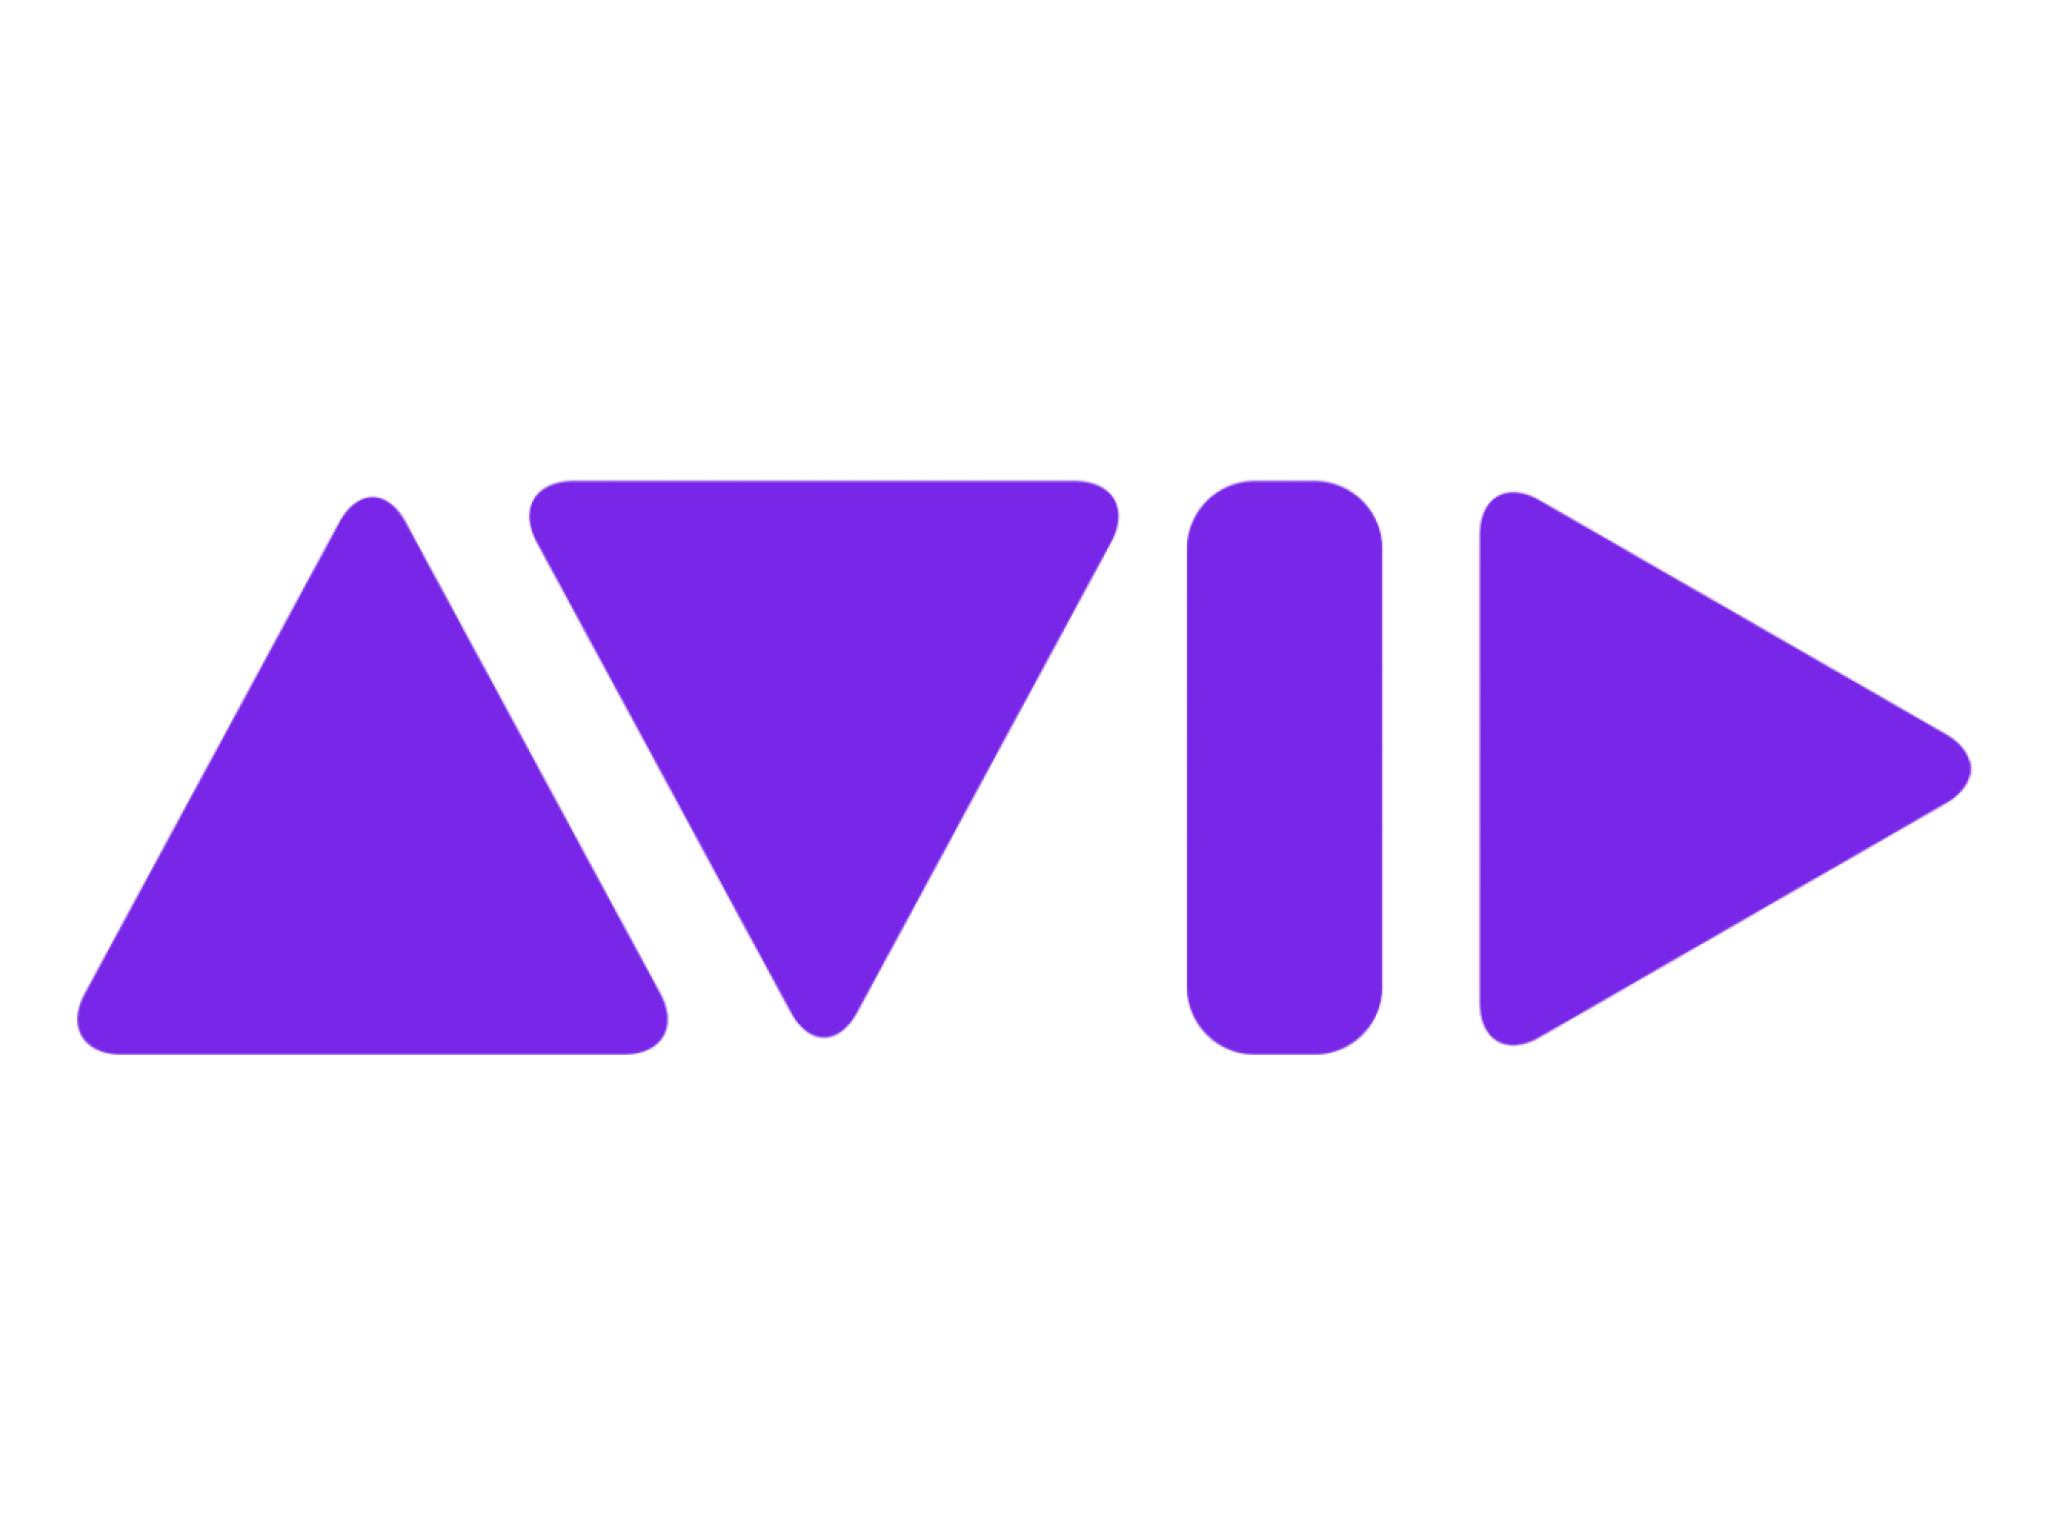  avid-technology-agrees-to-14b-acquisition-deal-posts-q2-earnings-beat 